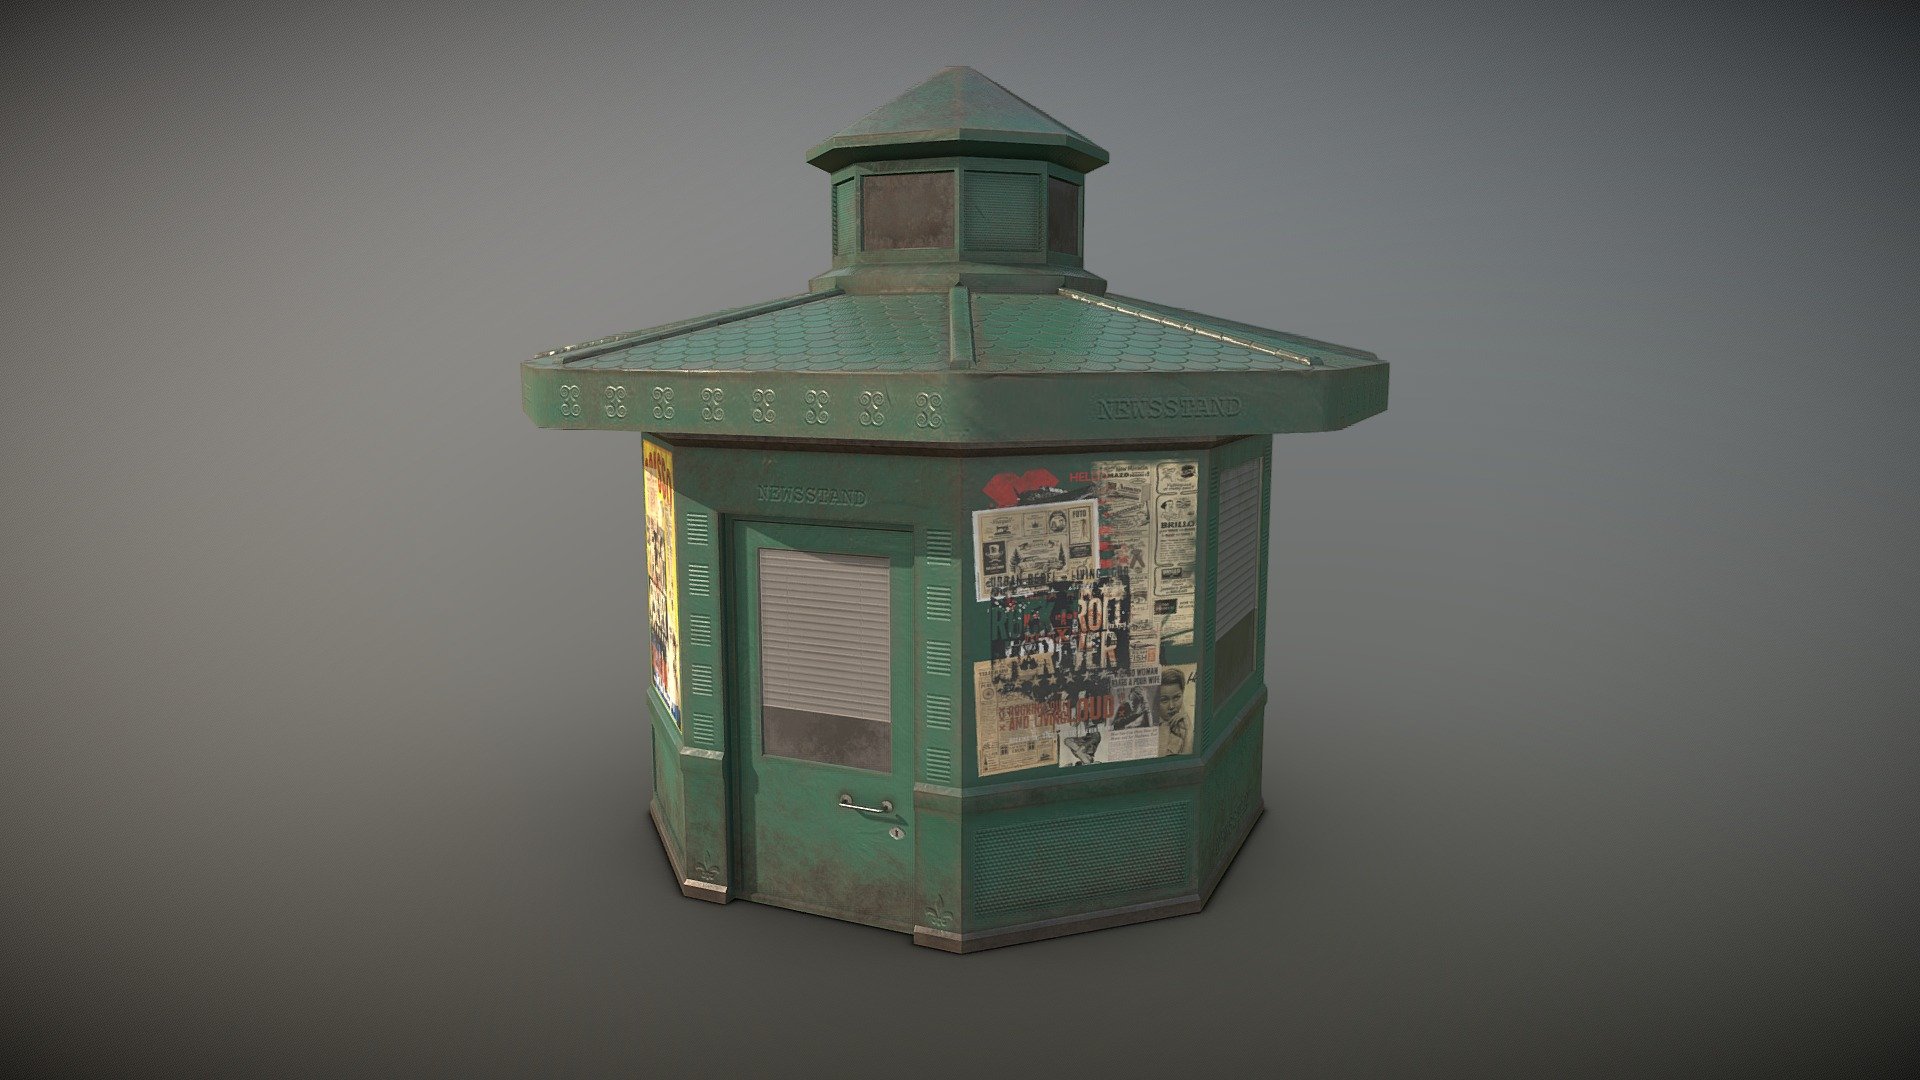 The old European newsstand kiosk
Low poly.
Polygons: 37
Verts: 2.3k
Textures size 4096x4096

Materials: 1 

Including maps:
Base Color
Roughness
Metalness
Normal

Created in Blender
The texture was created in Substance 3D Painter - Newsstand/Advertising Kiosk - Download Free 3D model by exiS7-Gs 3d model